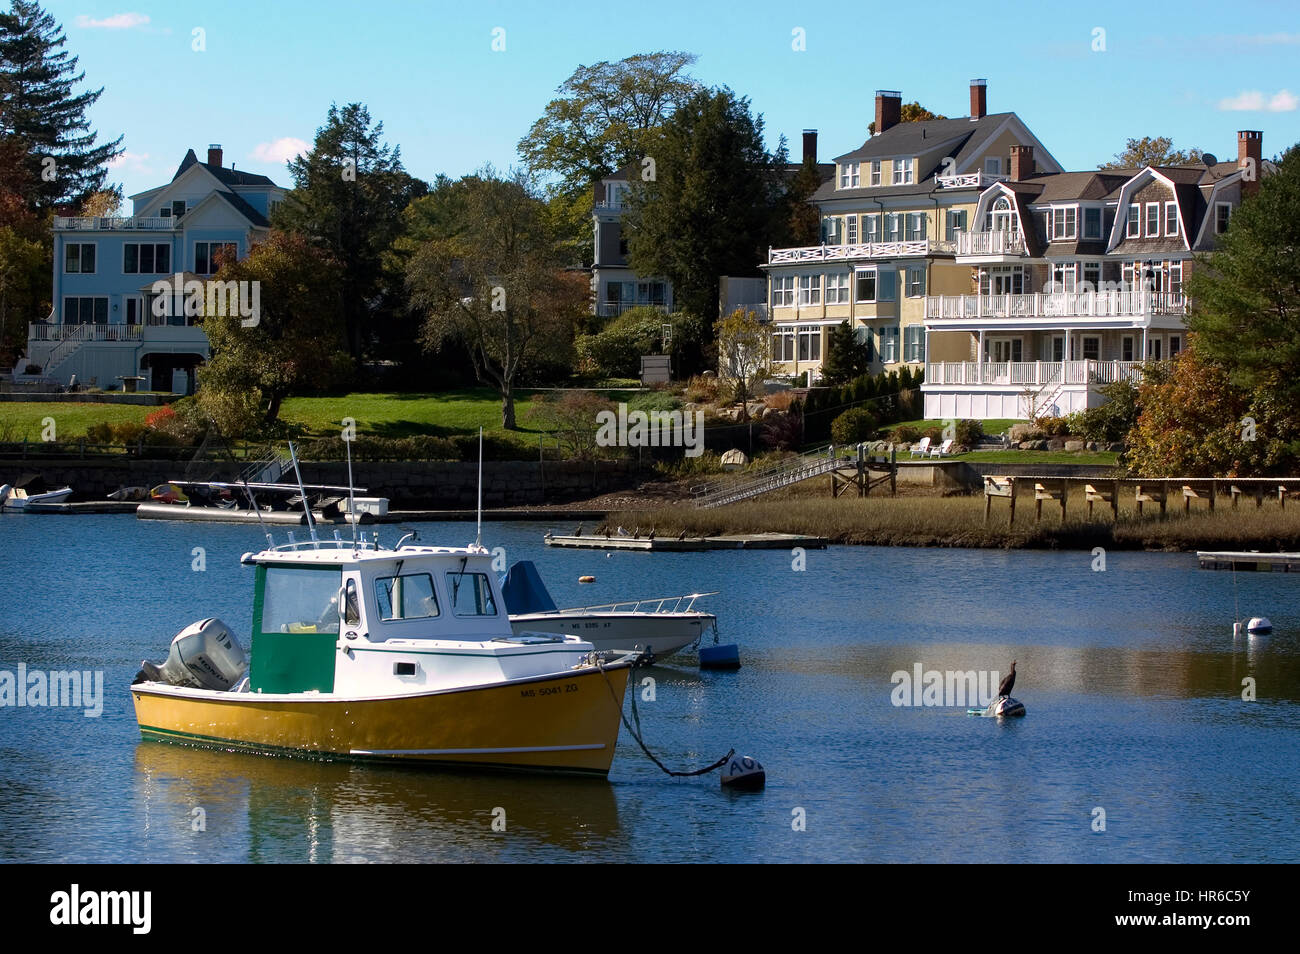 The harbor in the seaside  town of Manchester by the Sea, Massachusetts - Setting for the movie of the same name. Stock Photo